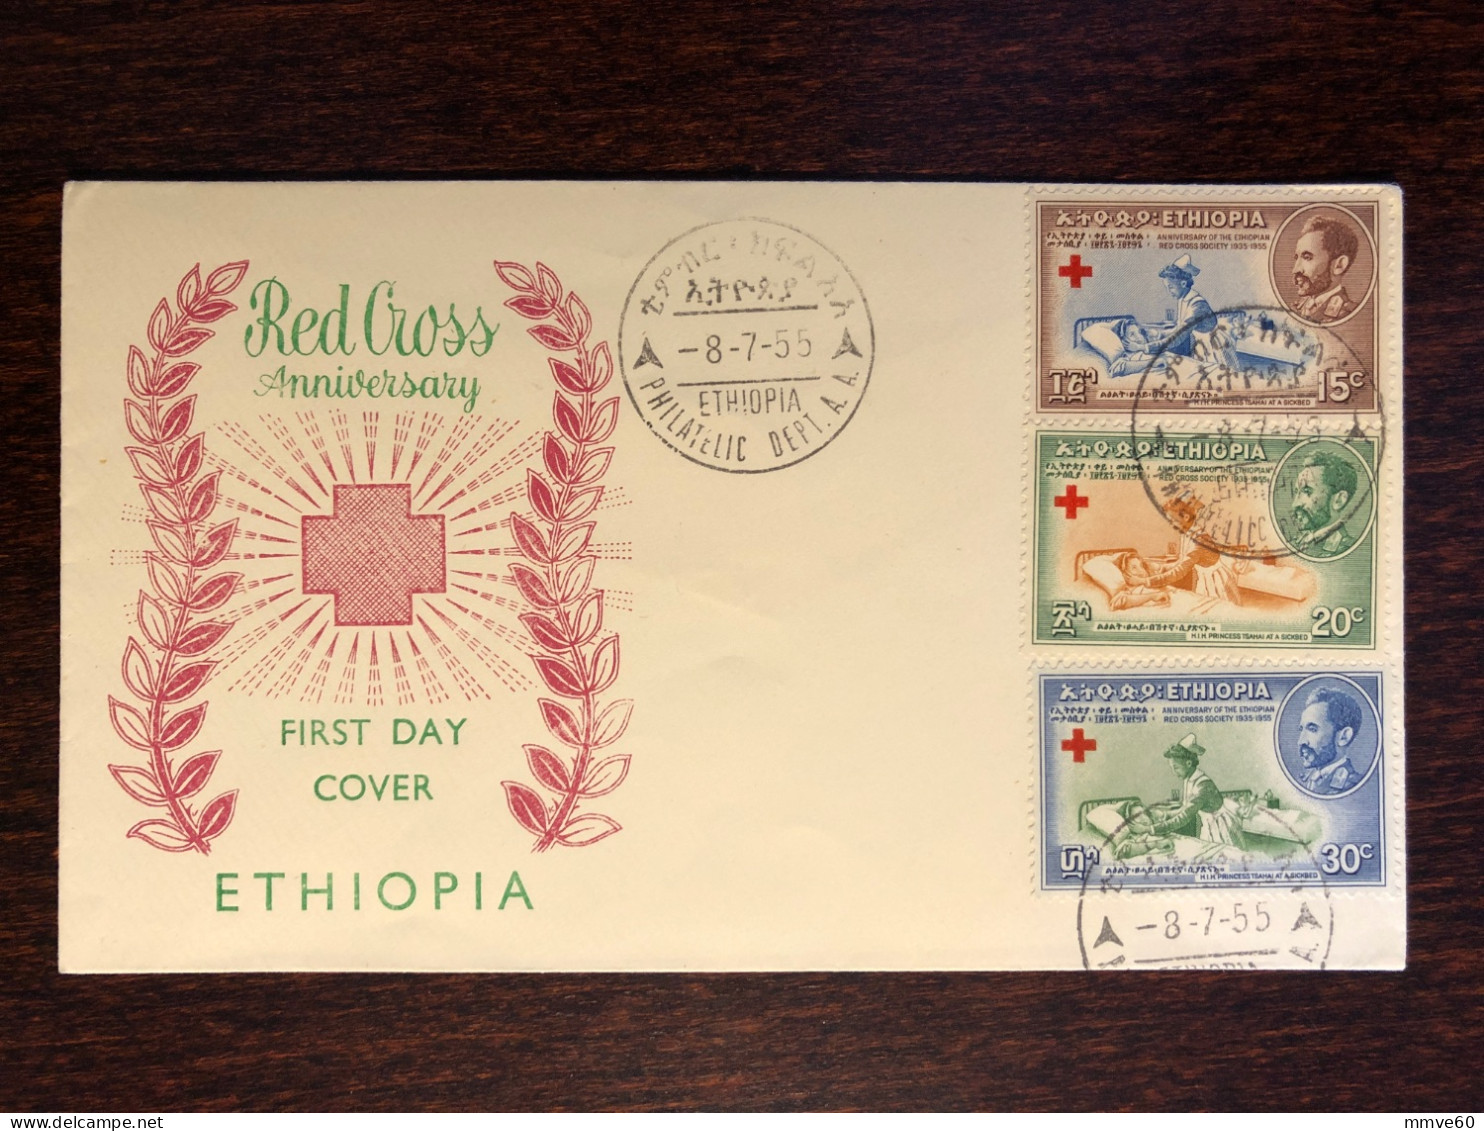 ETHIOPIA FDC COVER 1955 YEAR RED CROSS HEALTH MEDICINE STAMPS - Ethiopie